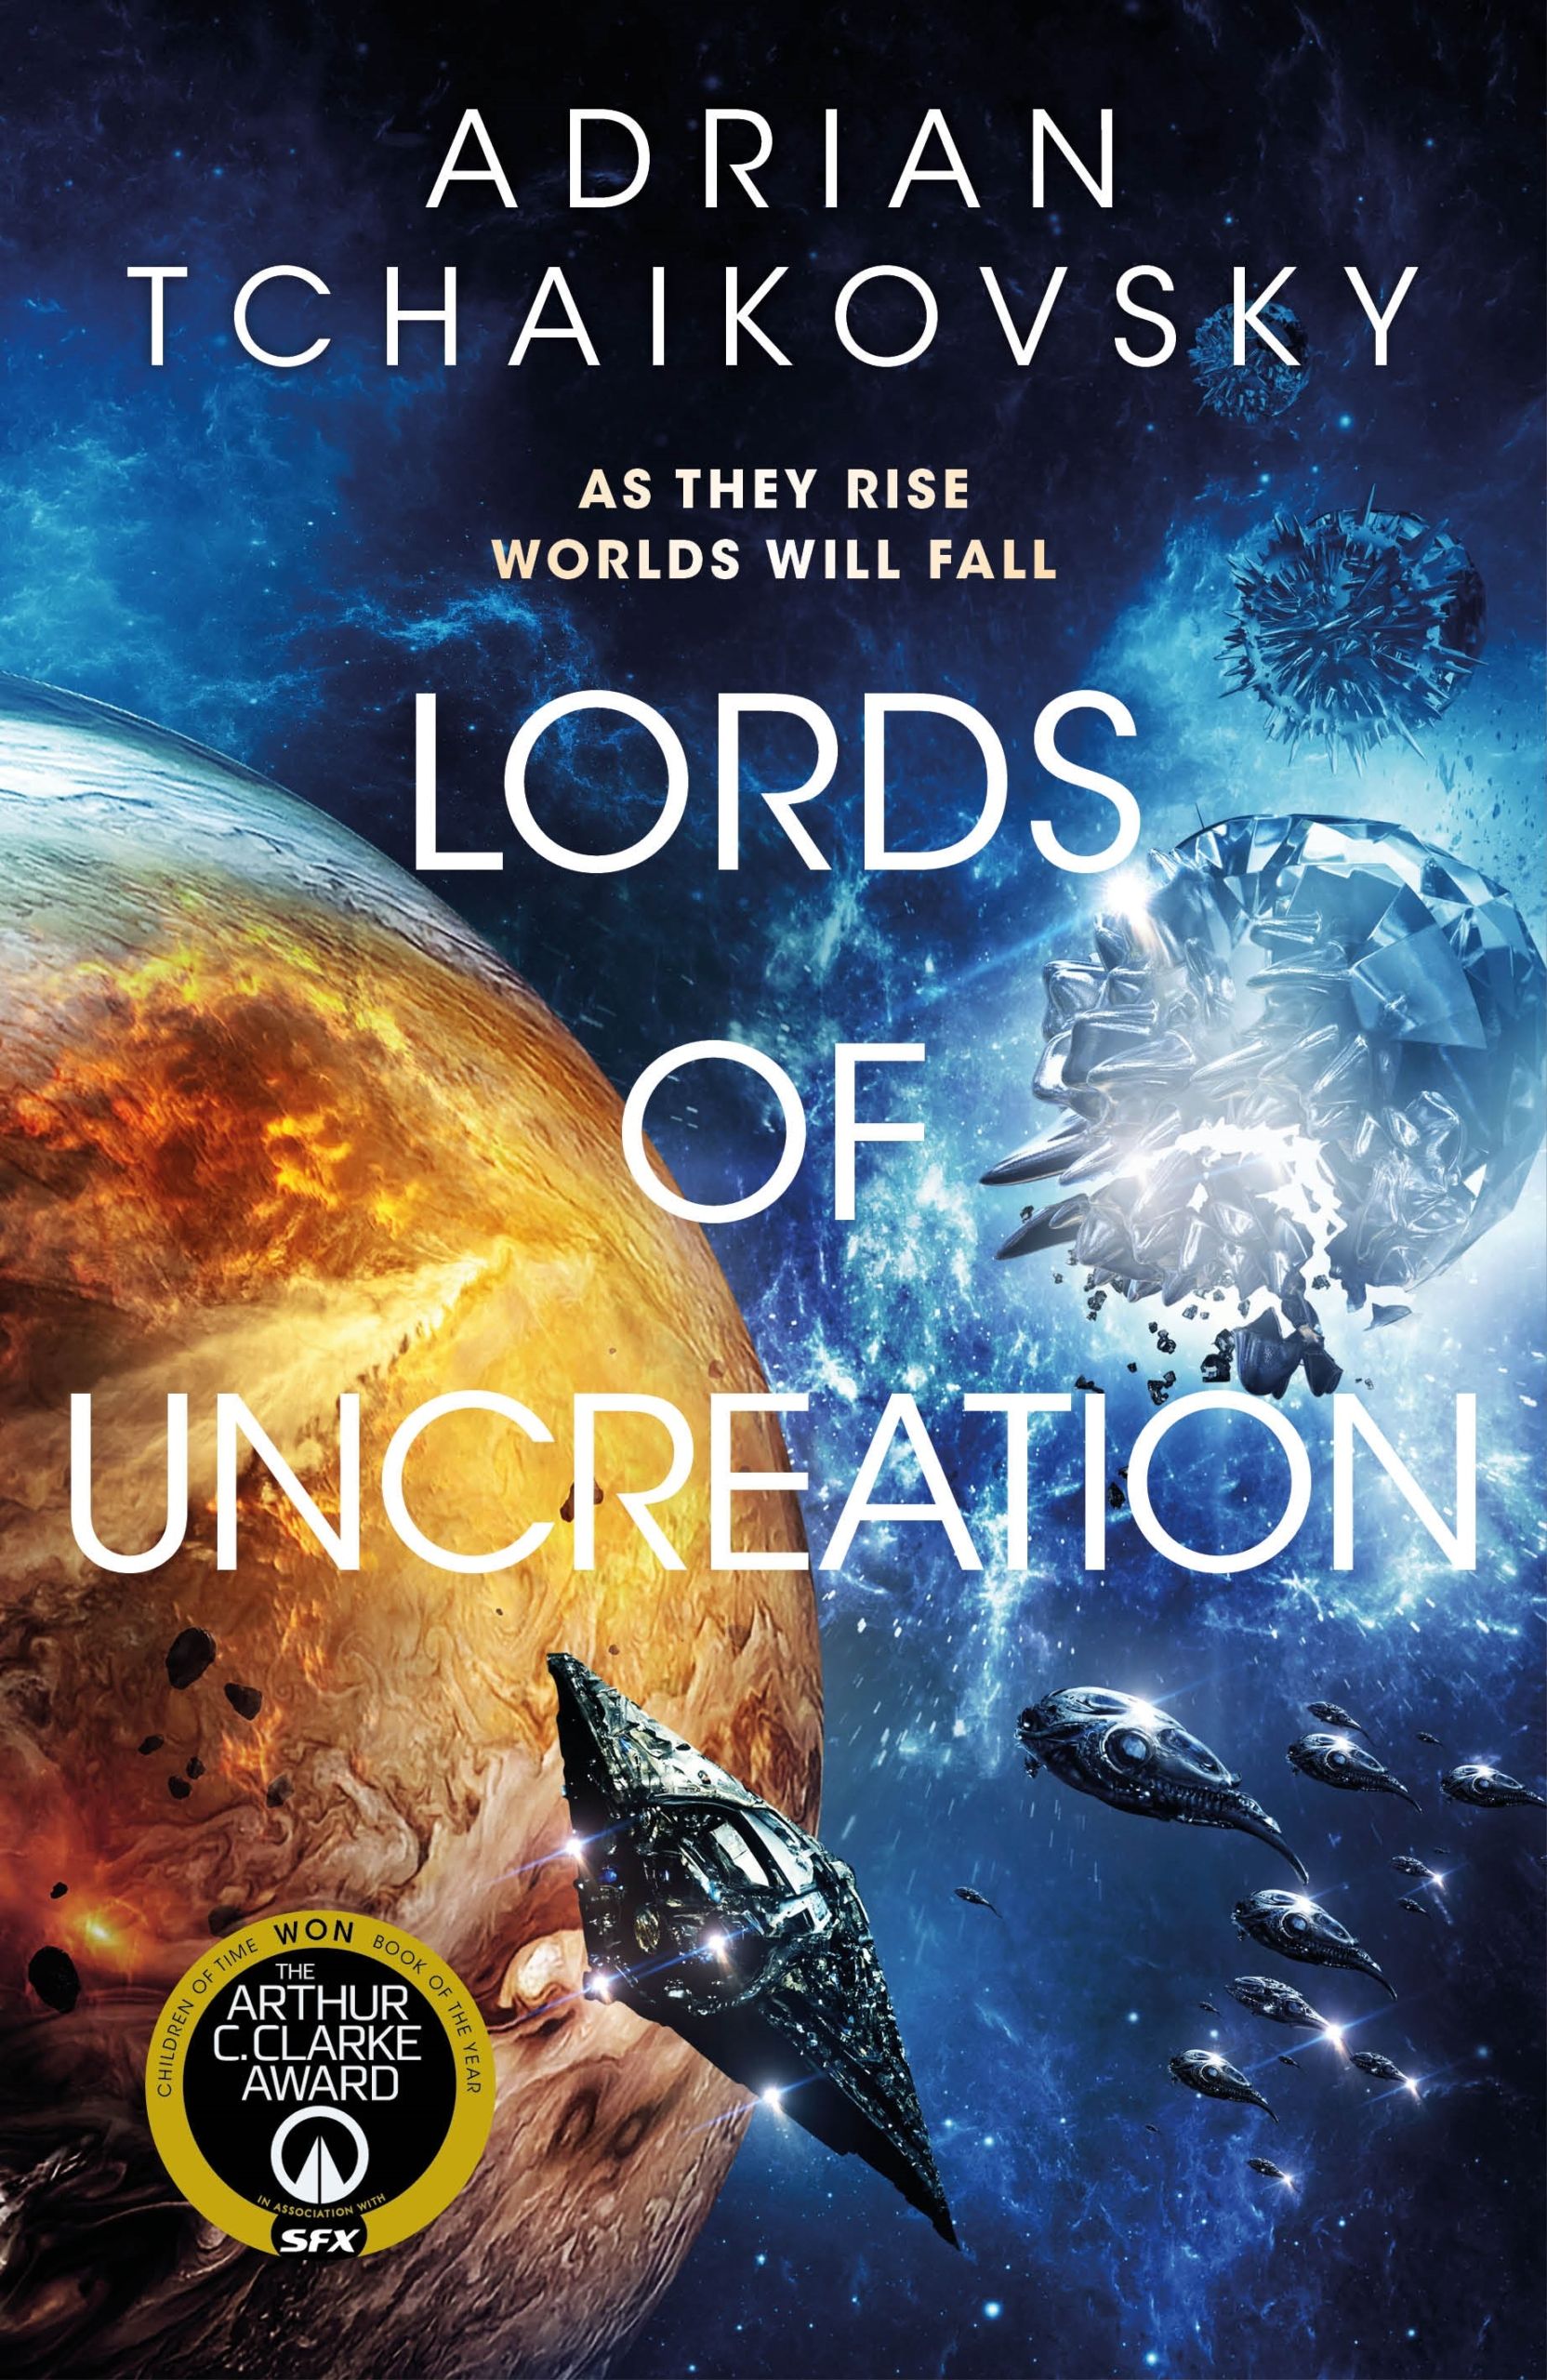 Lords of Uncreation by Adrian Tchaikovsky book cover